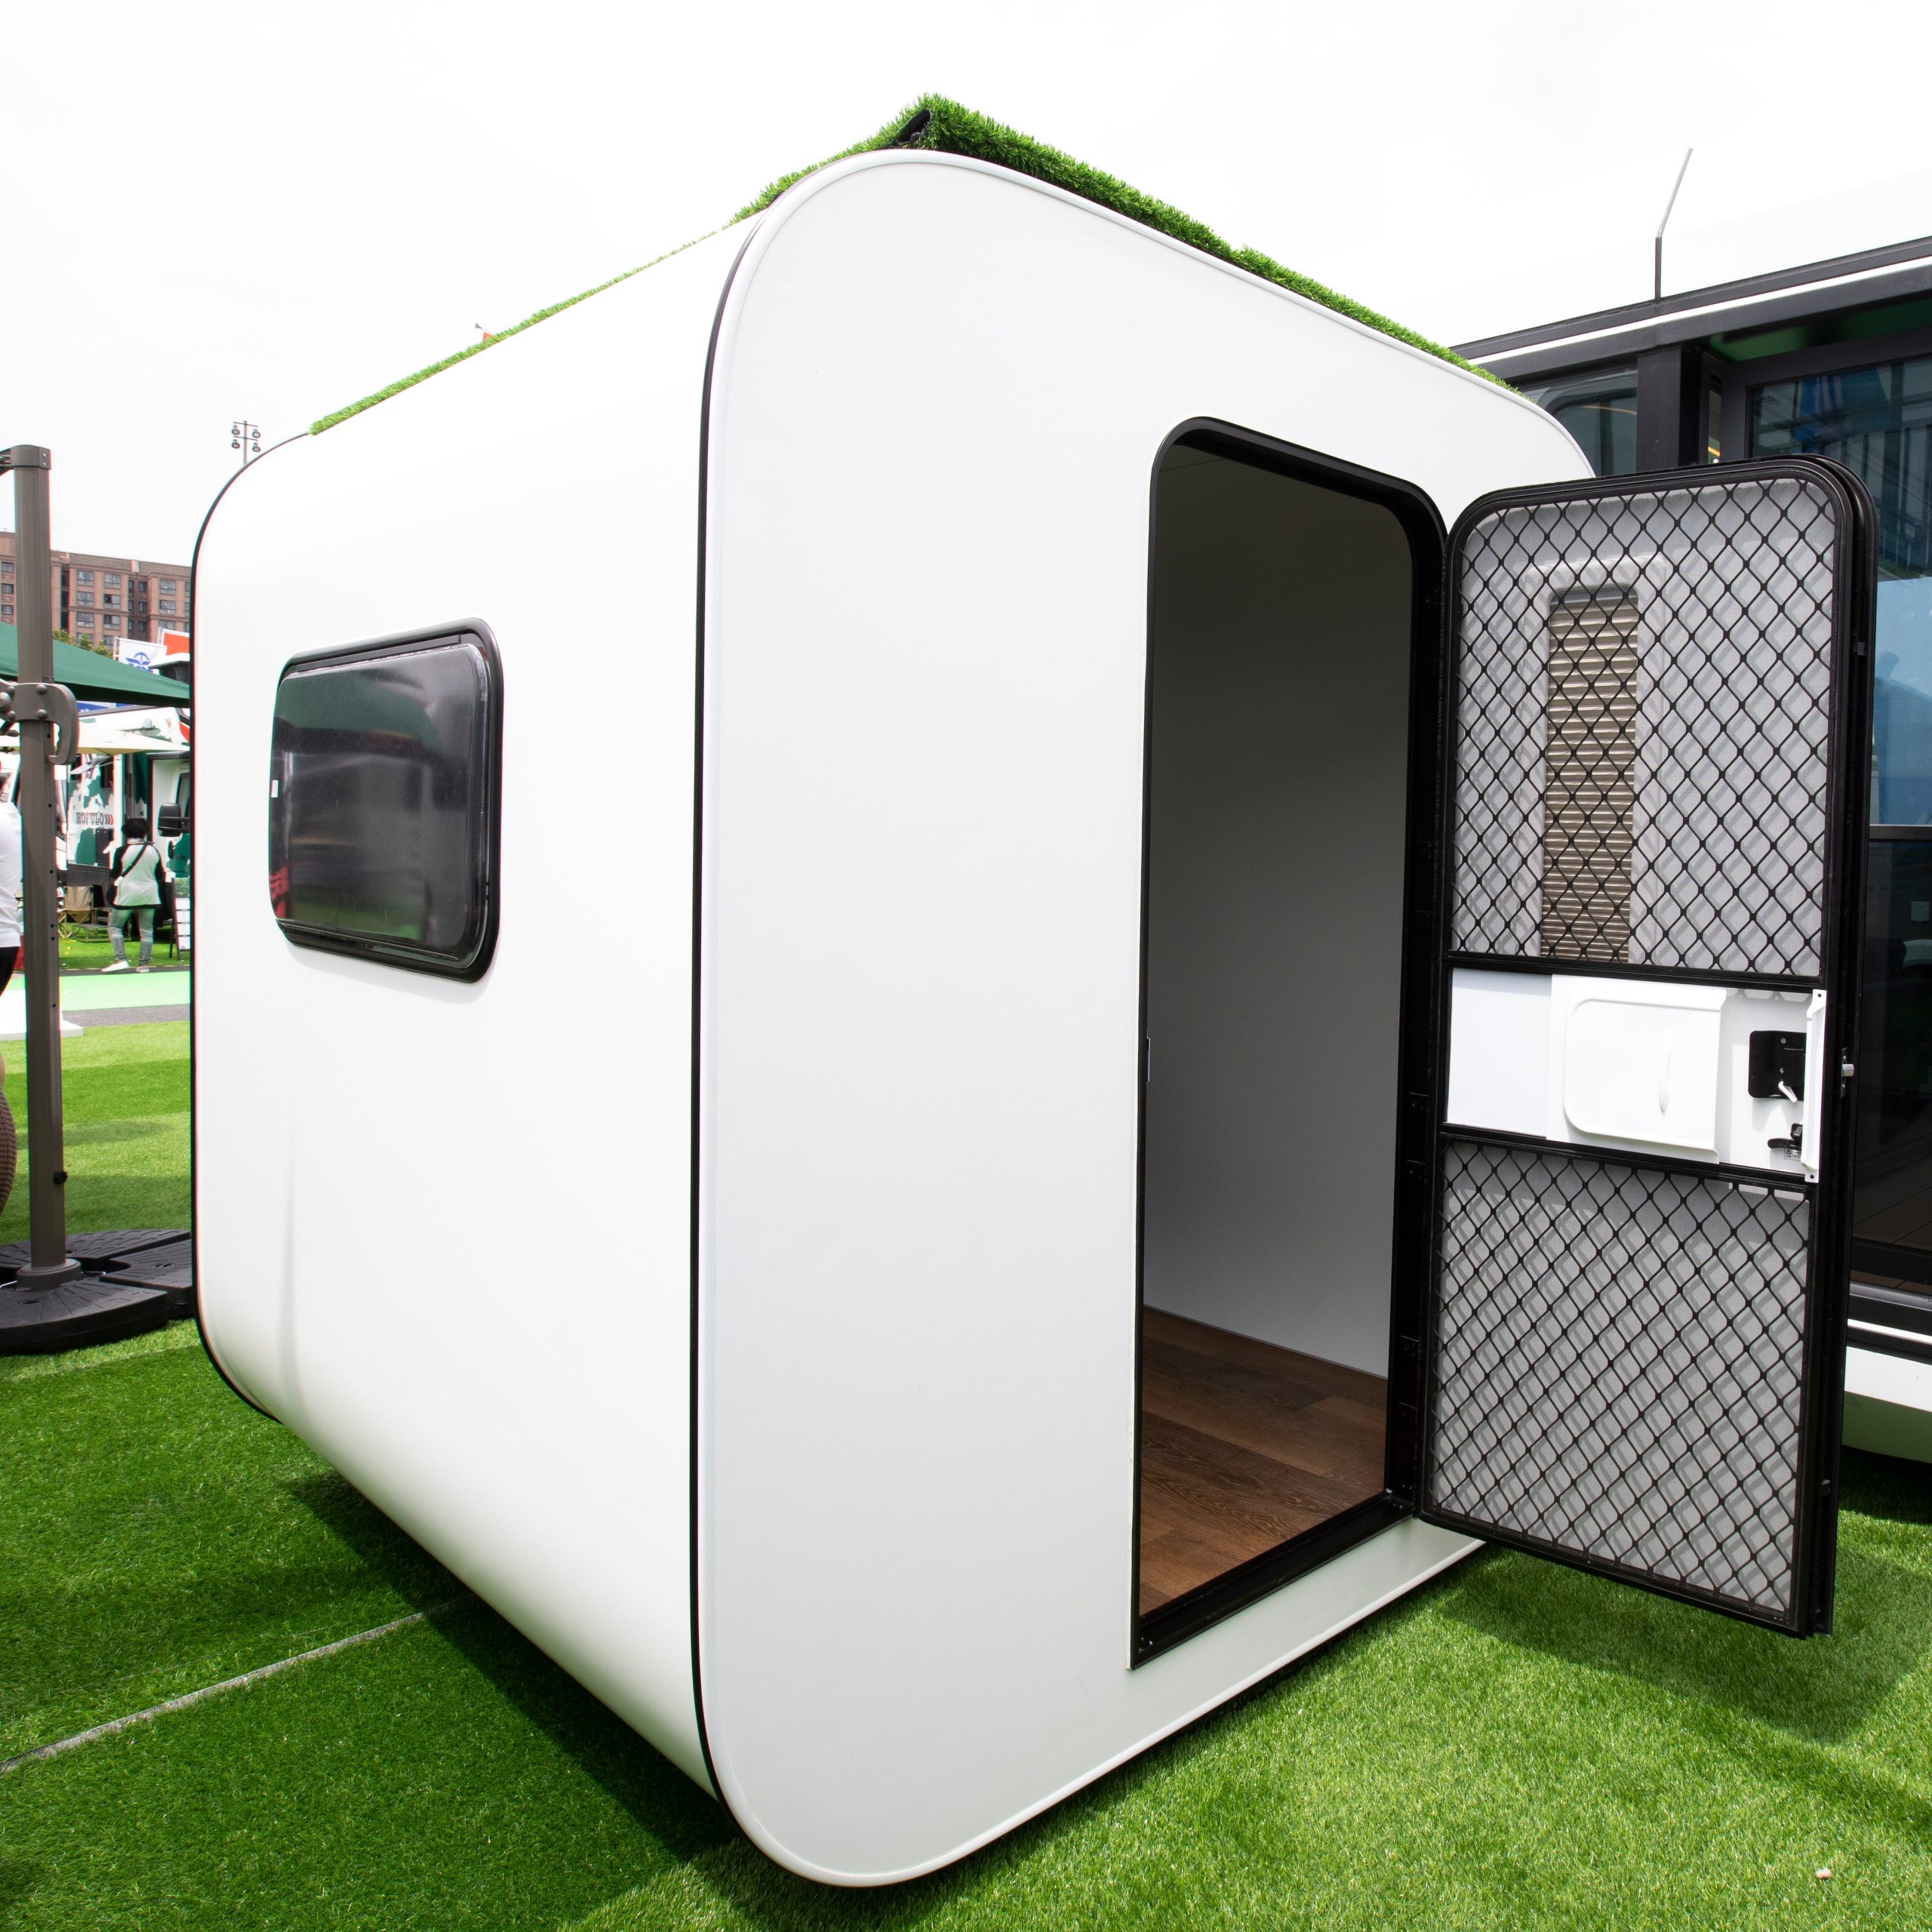 Meet in Peace with Our Soundproof Office Pod. Outdoor Home Office Pod,Prefab Backyard Office Shed Pod Europe France, Germany, Spain, Ireland, Italy, Netherlands